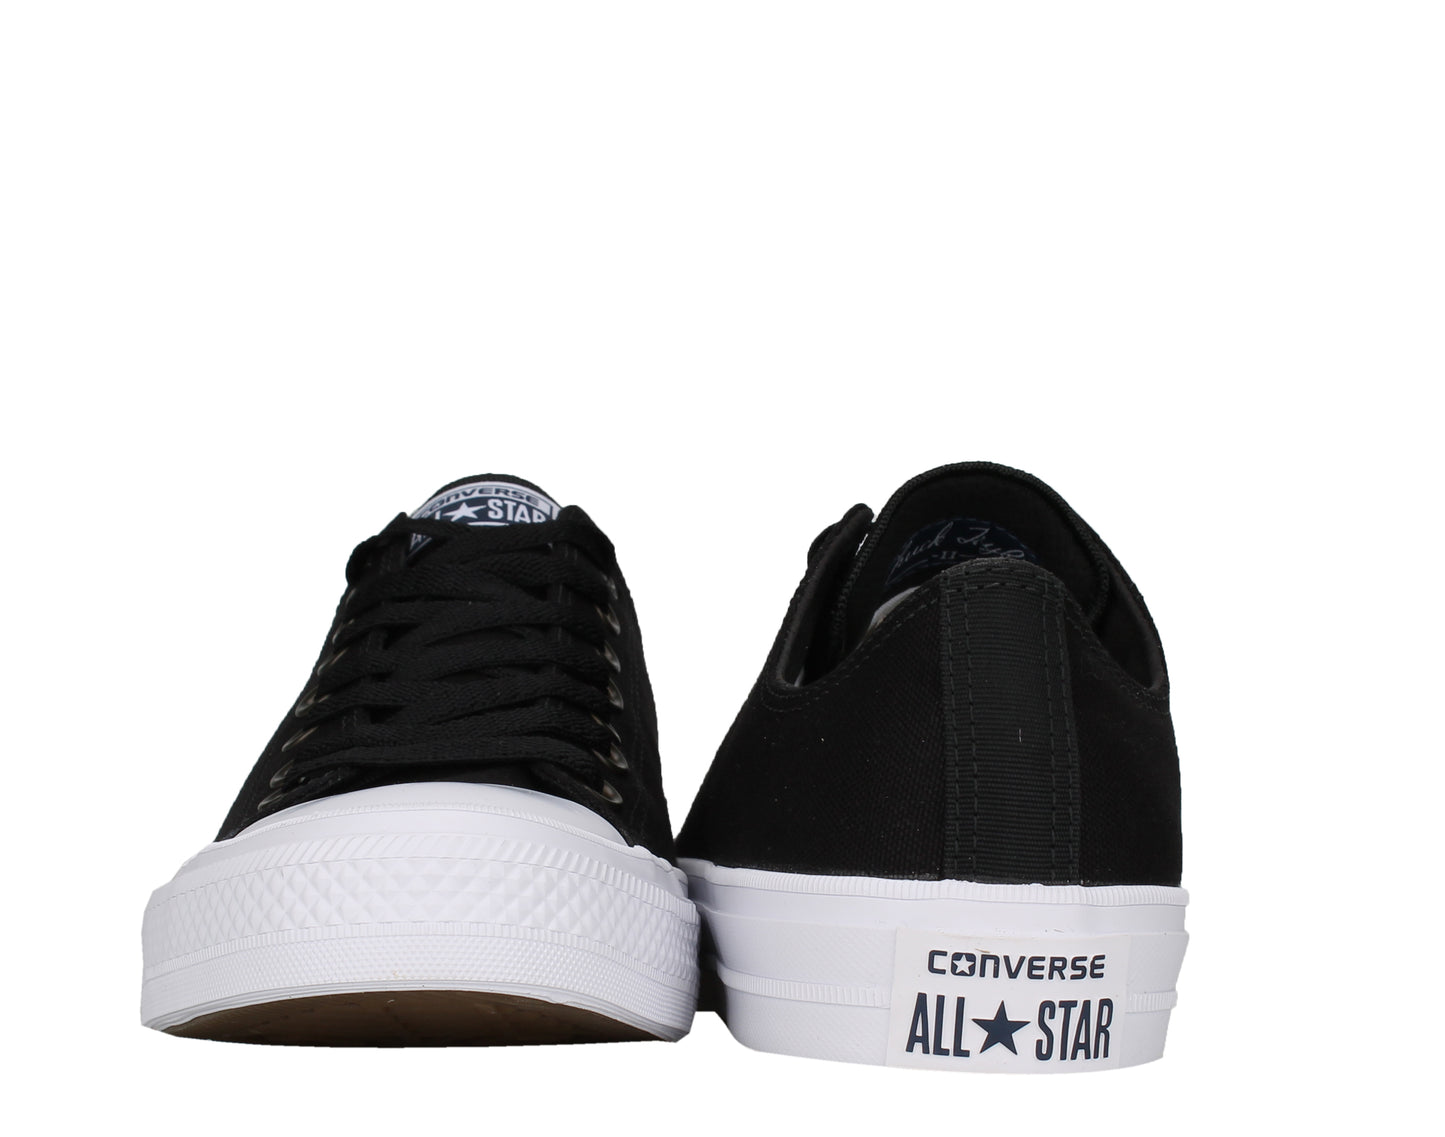 Converse Chuck Taylor All Star II Low Top Black/White Shoes 150149C